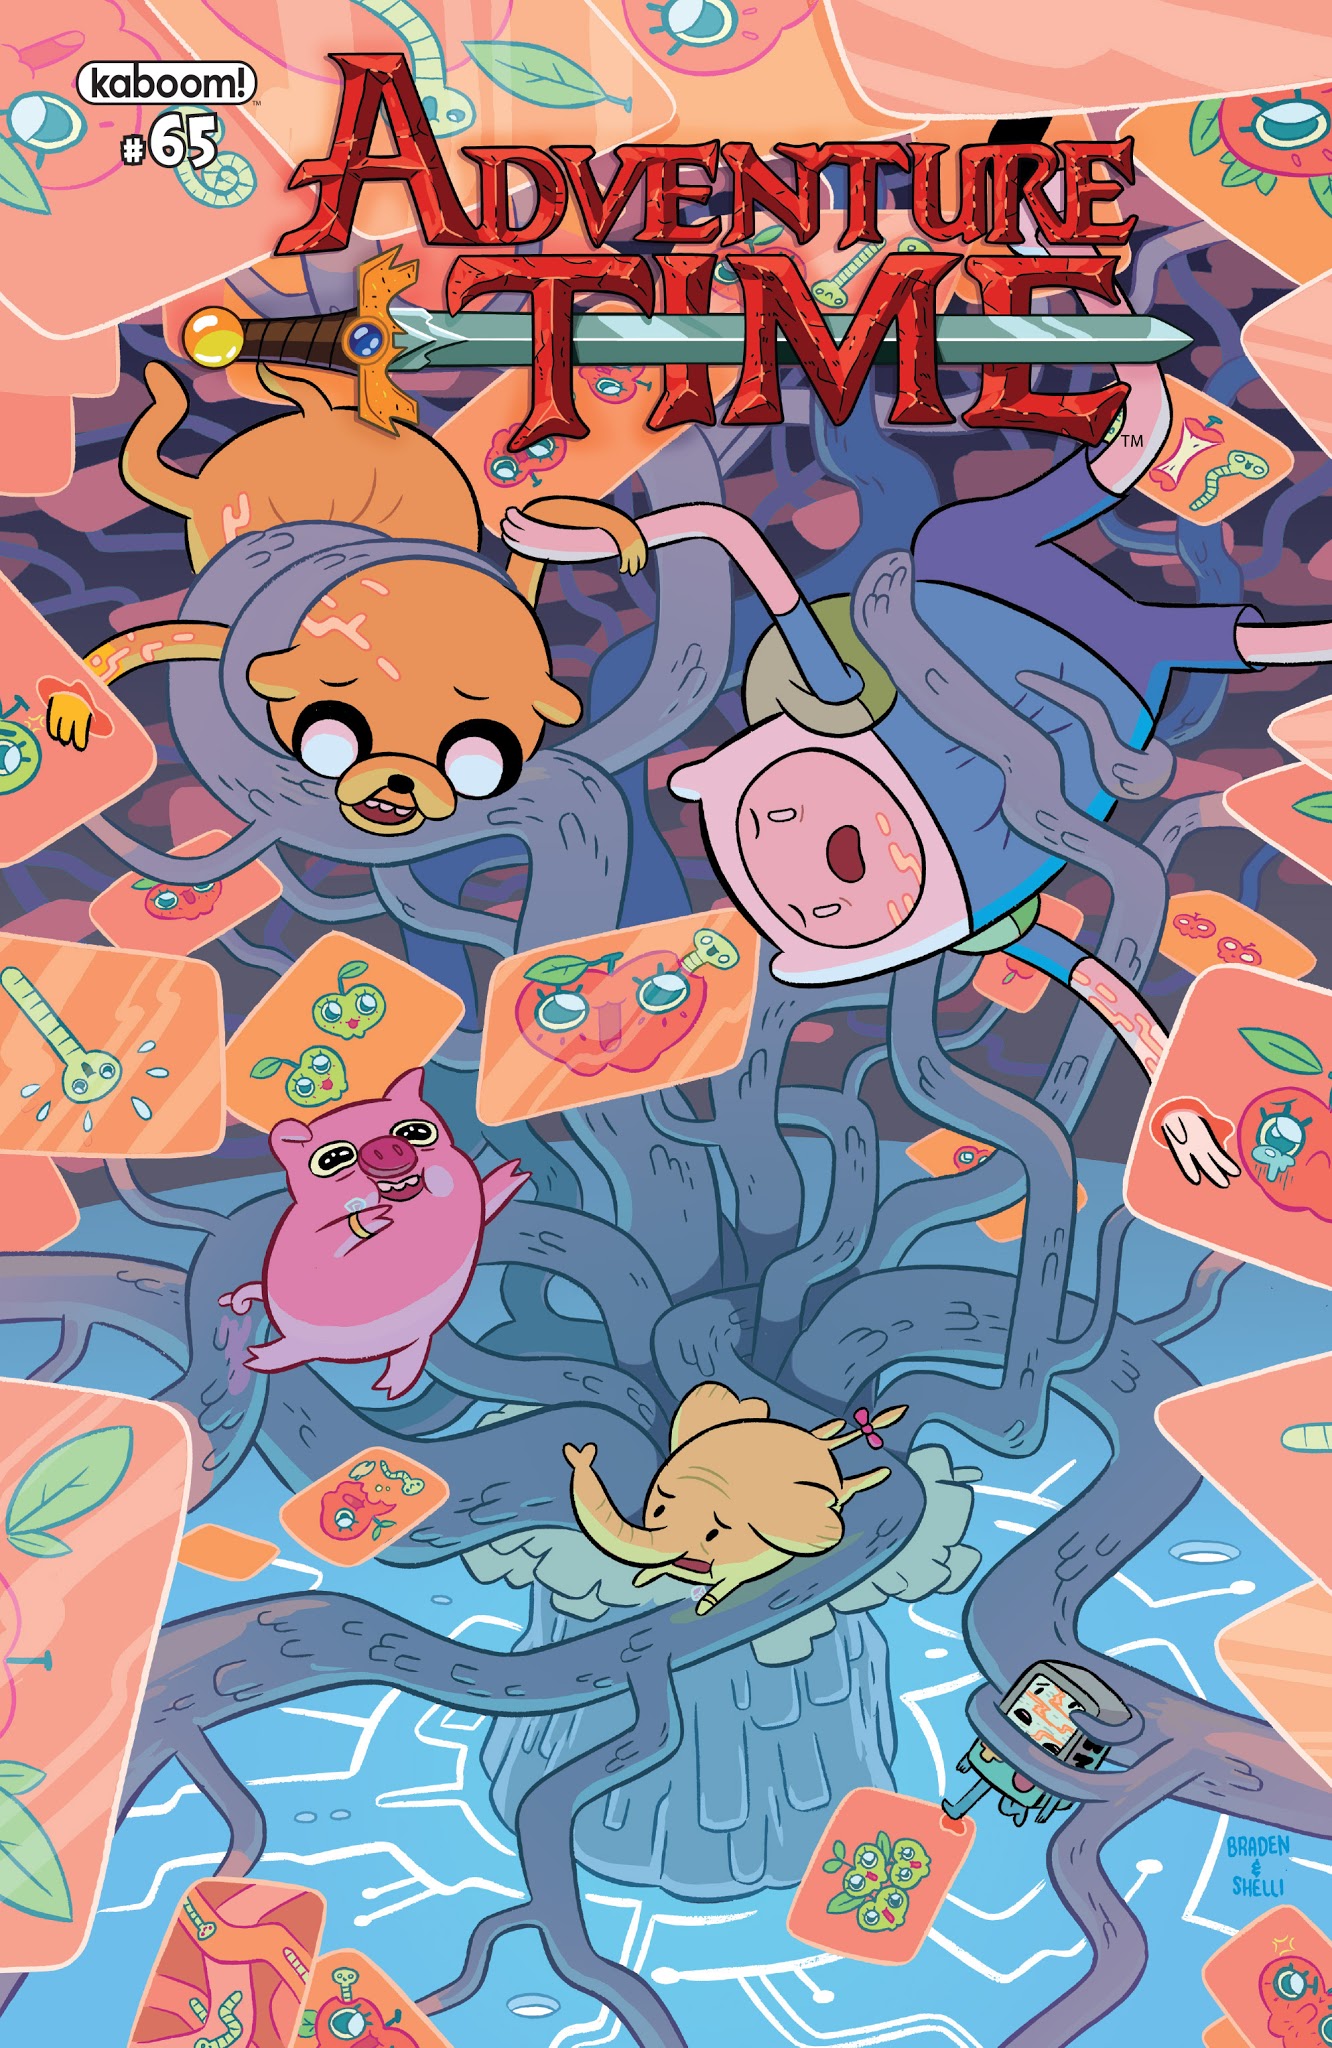 Read online Adventure Time comic -  Issue #65 - 1